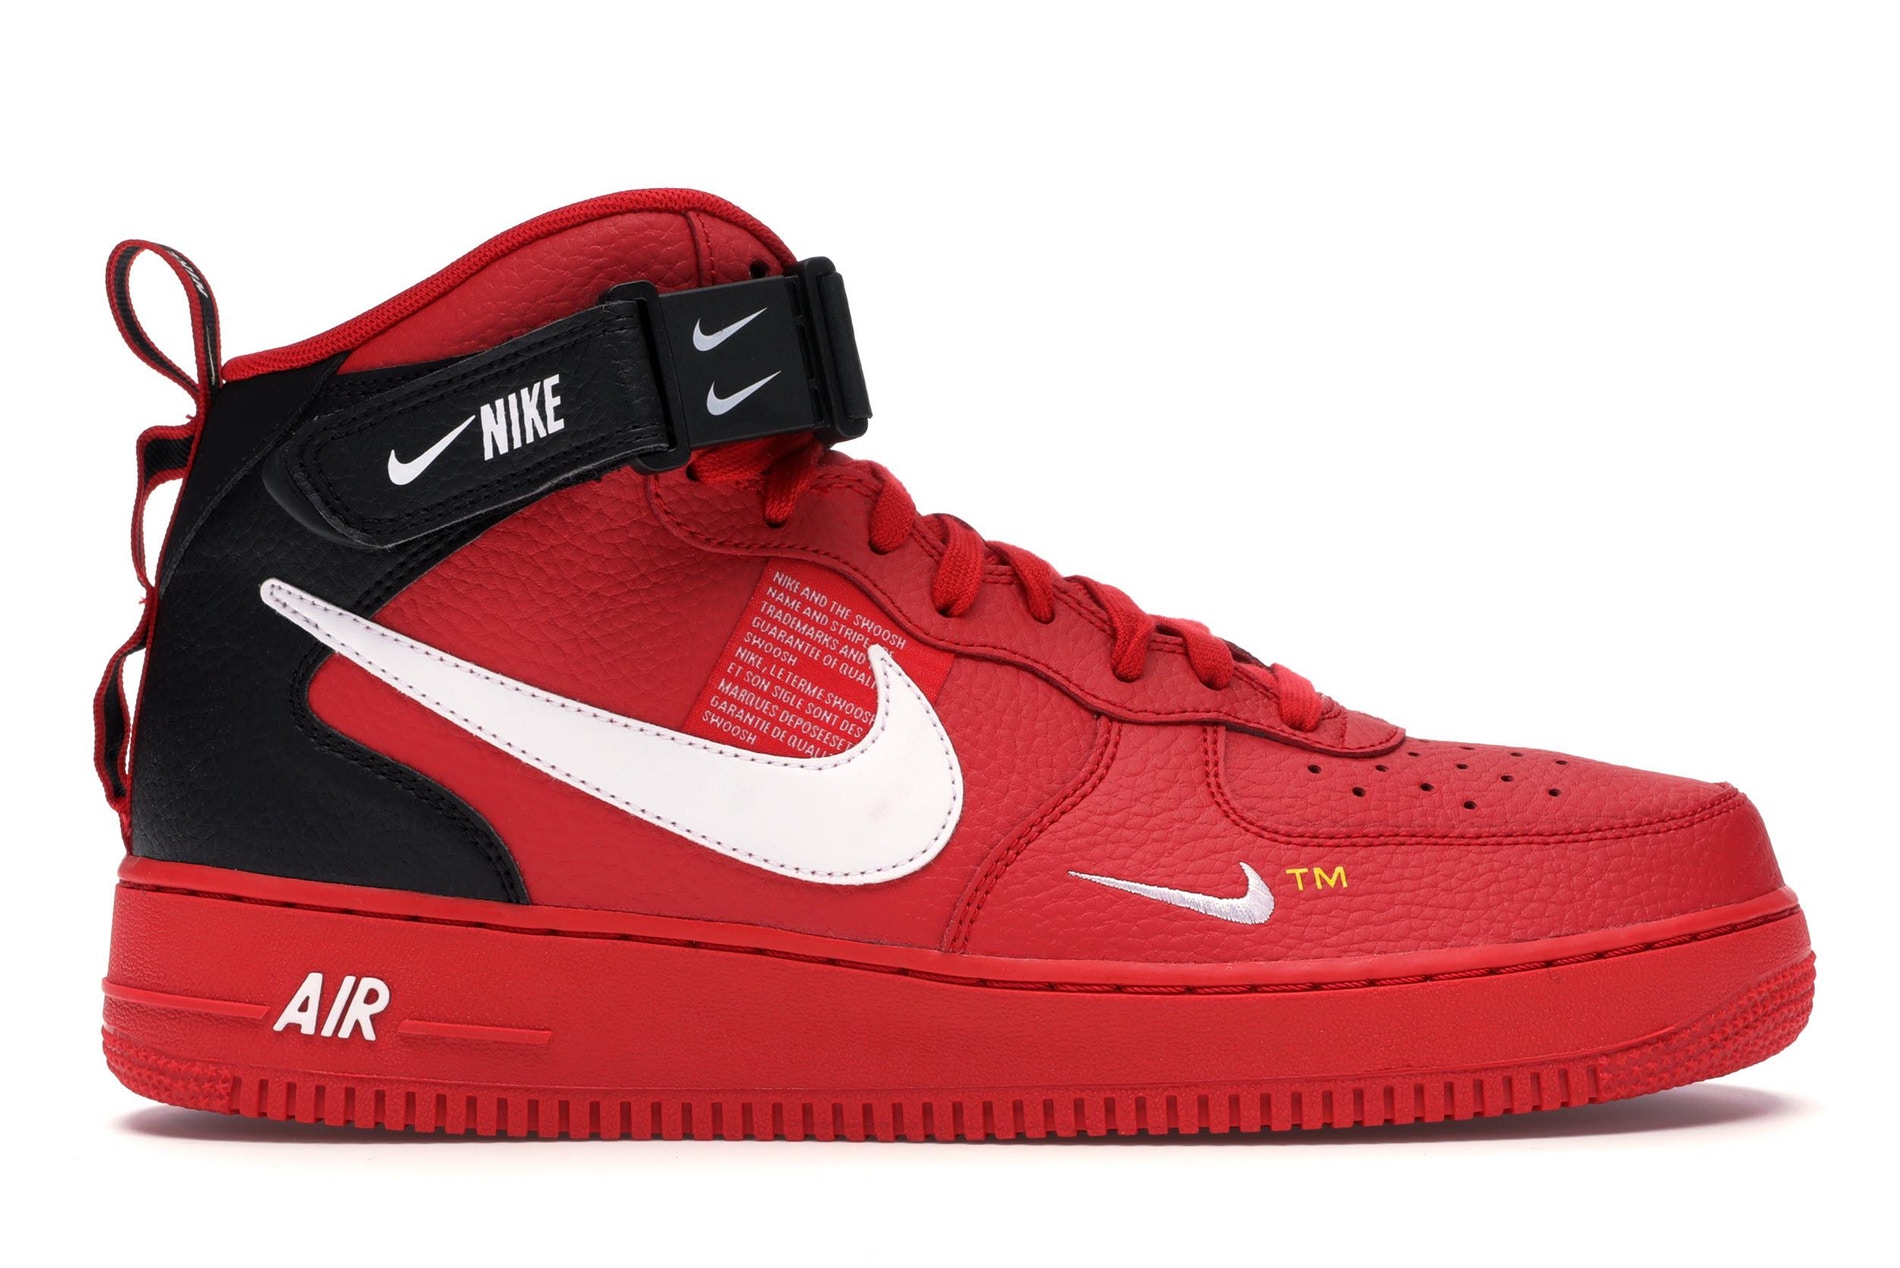 Nike Air Force 1 Mid 07 lv8